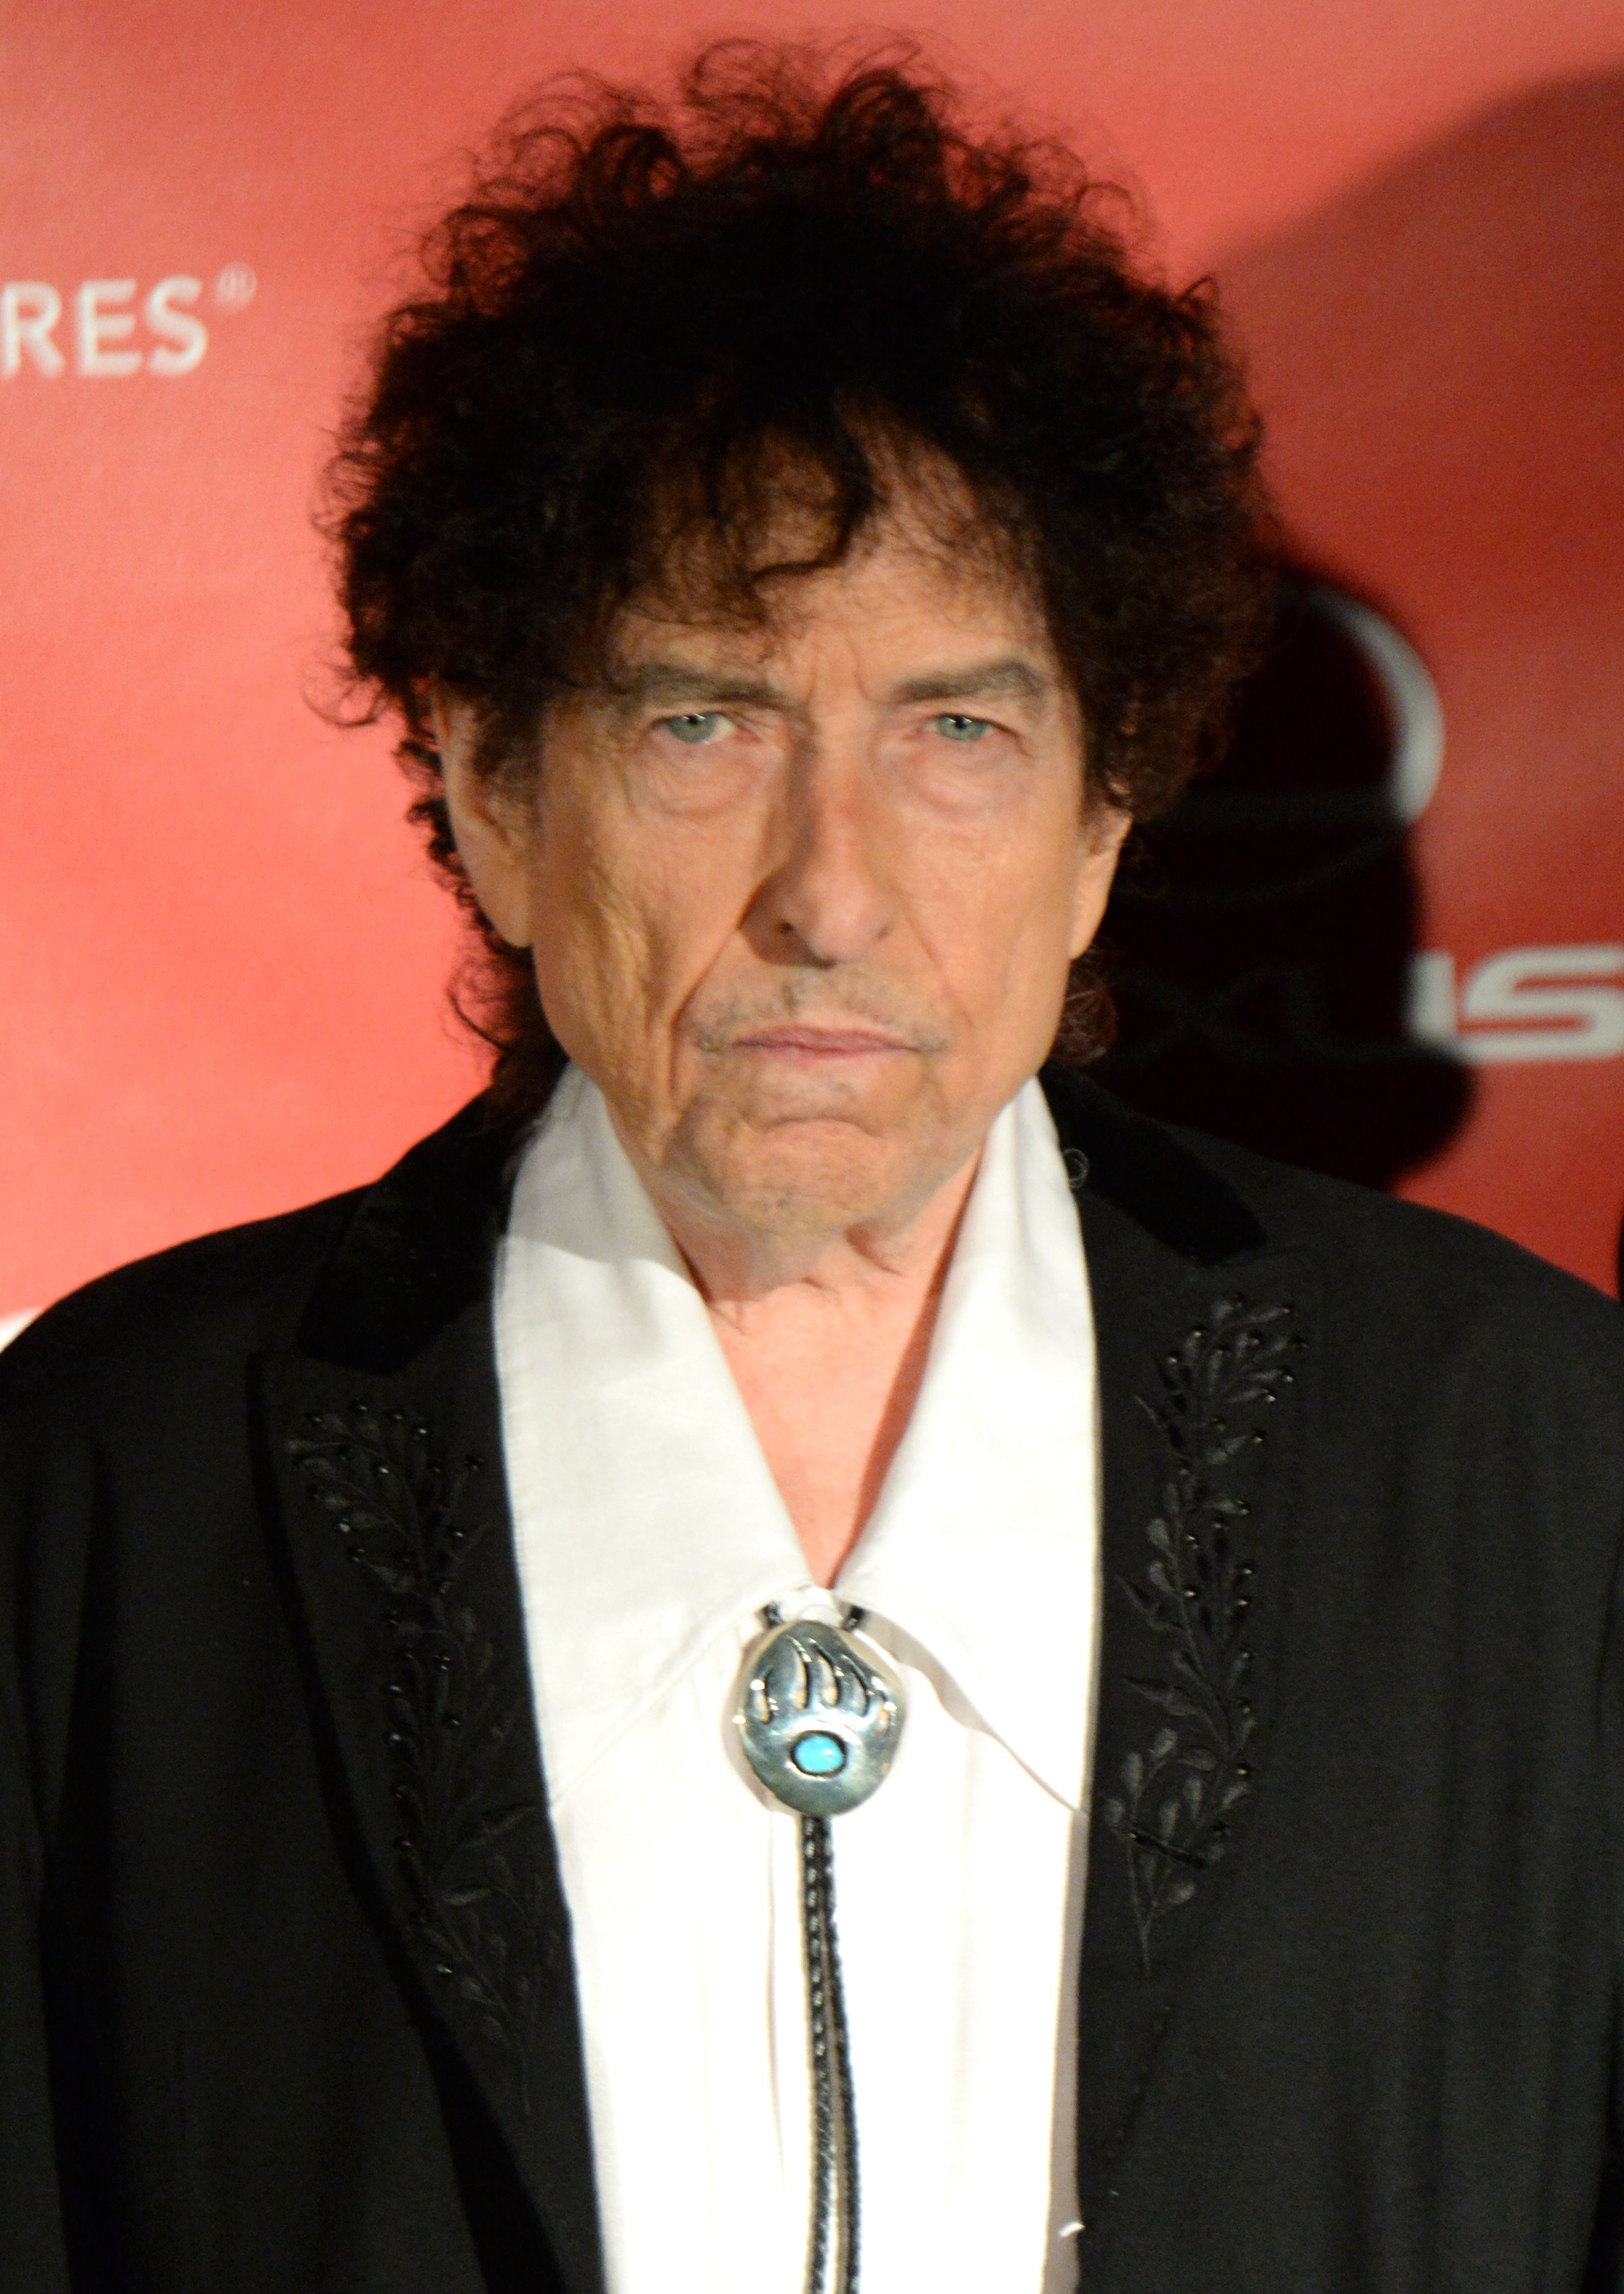 LOS ANGELES, CA - FEBRUARY 06:  (Exclusive Coverage) Bob Dylan attends the 25th anniversary MusiCares 2015 Person Of The Year Gala honoring Bob Dylan at the Los Angeles Convention Center on February 6, 2015 in Los Angeles, California. The annual benefit r (Foto: WireImage)